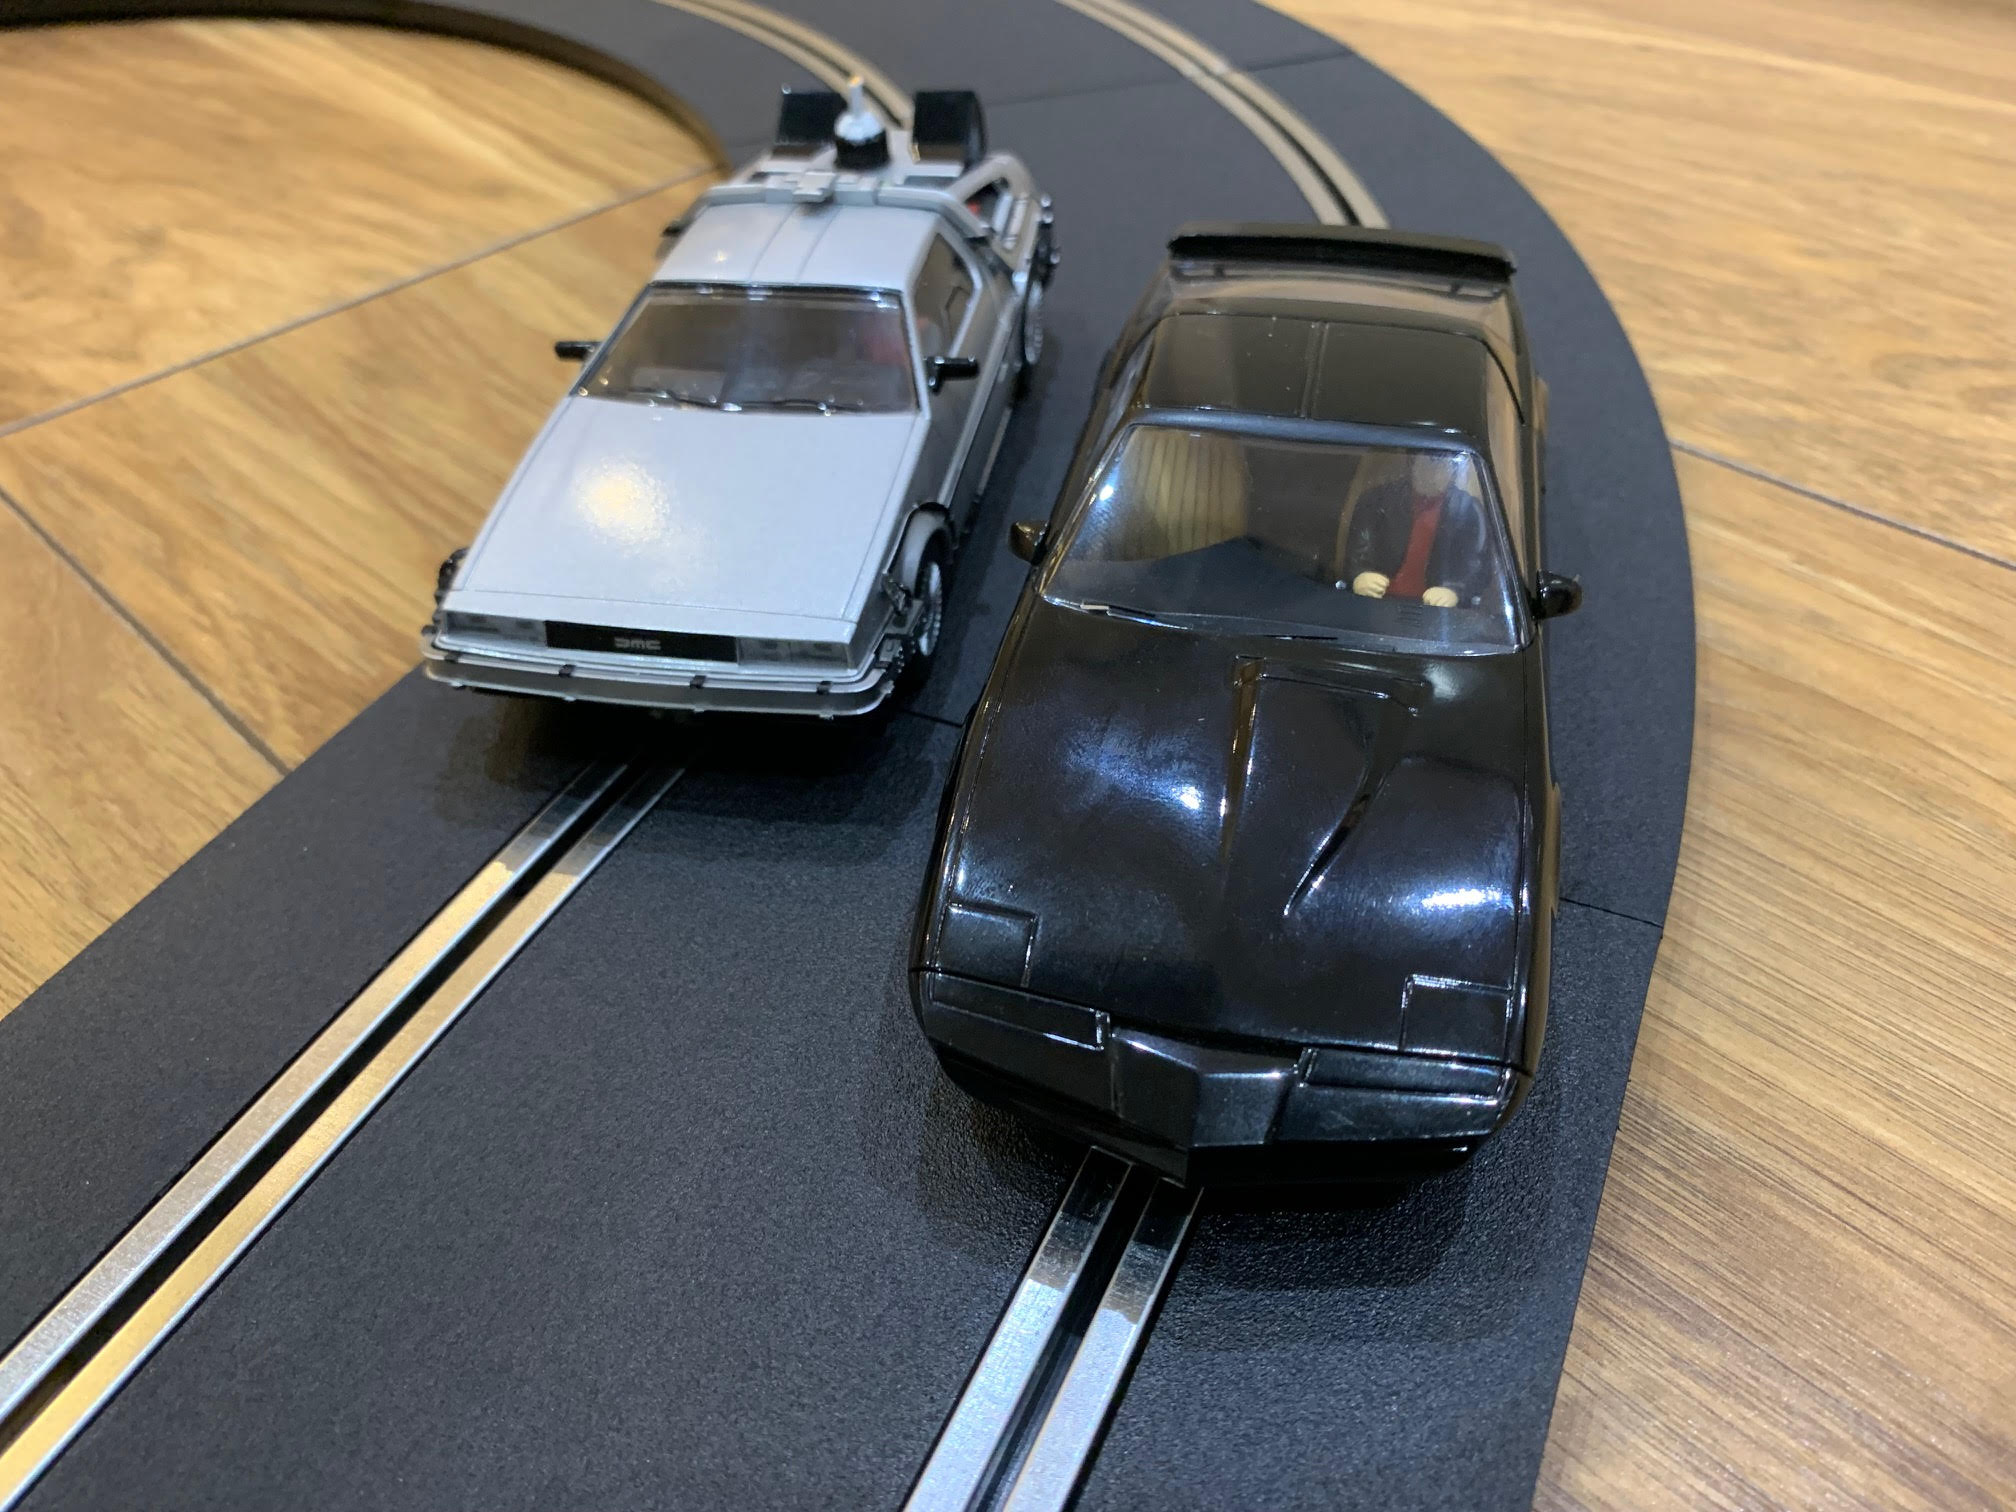 Hornby Hobbies Ltd - Scalextric Back to the Future vs Knight Rider ...